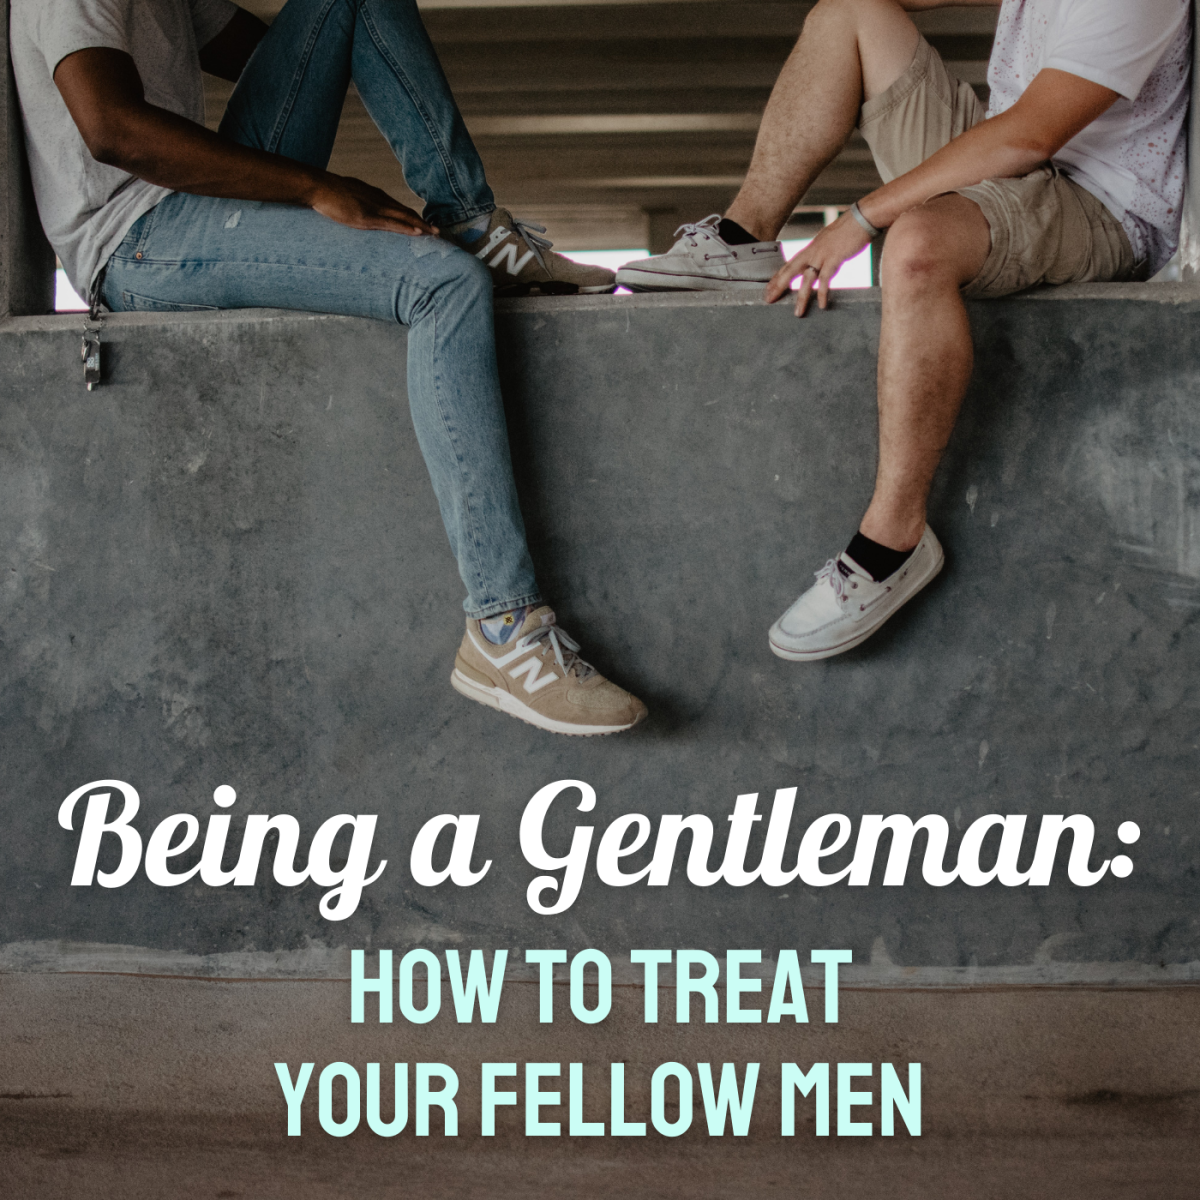 Learn how to behave as a gentleman when interacting with other men.